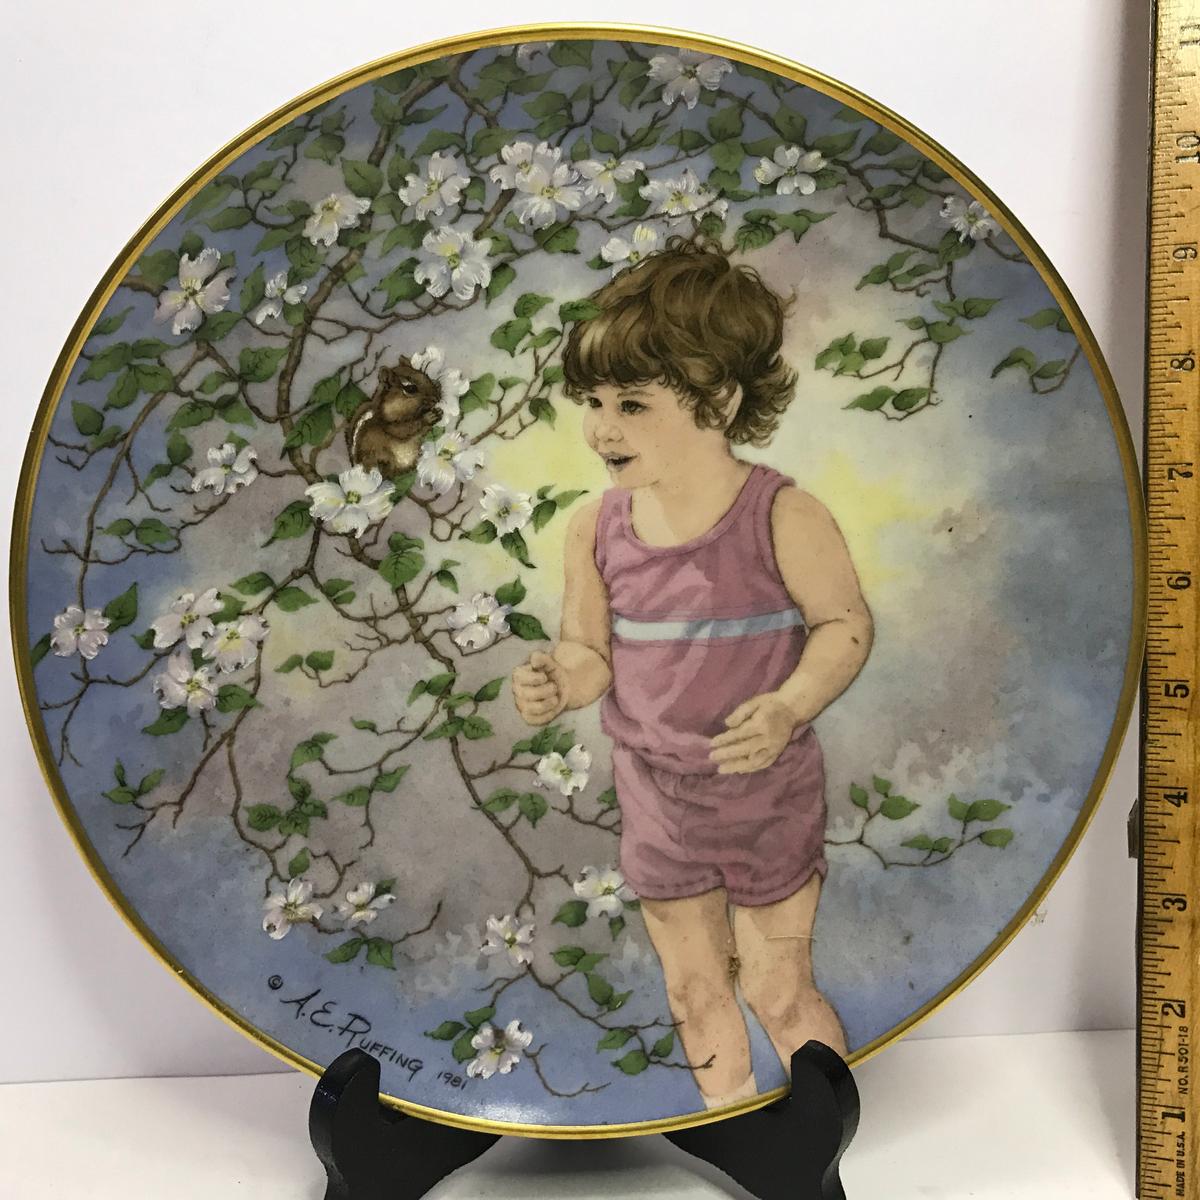 Danbury Mint "Journey of Dreams" by A.E. Ruffing "Small Talk" Collector's Plate